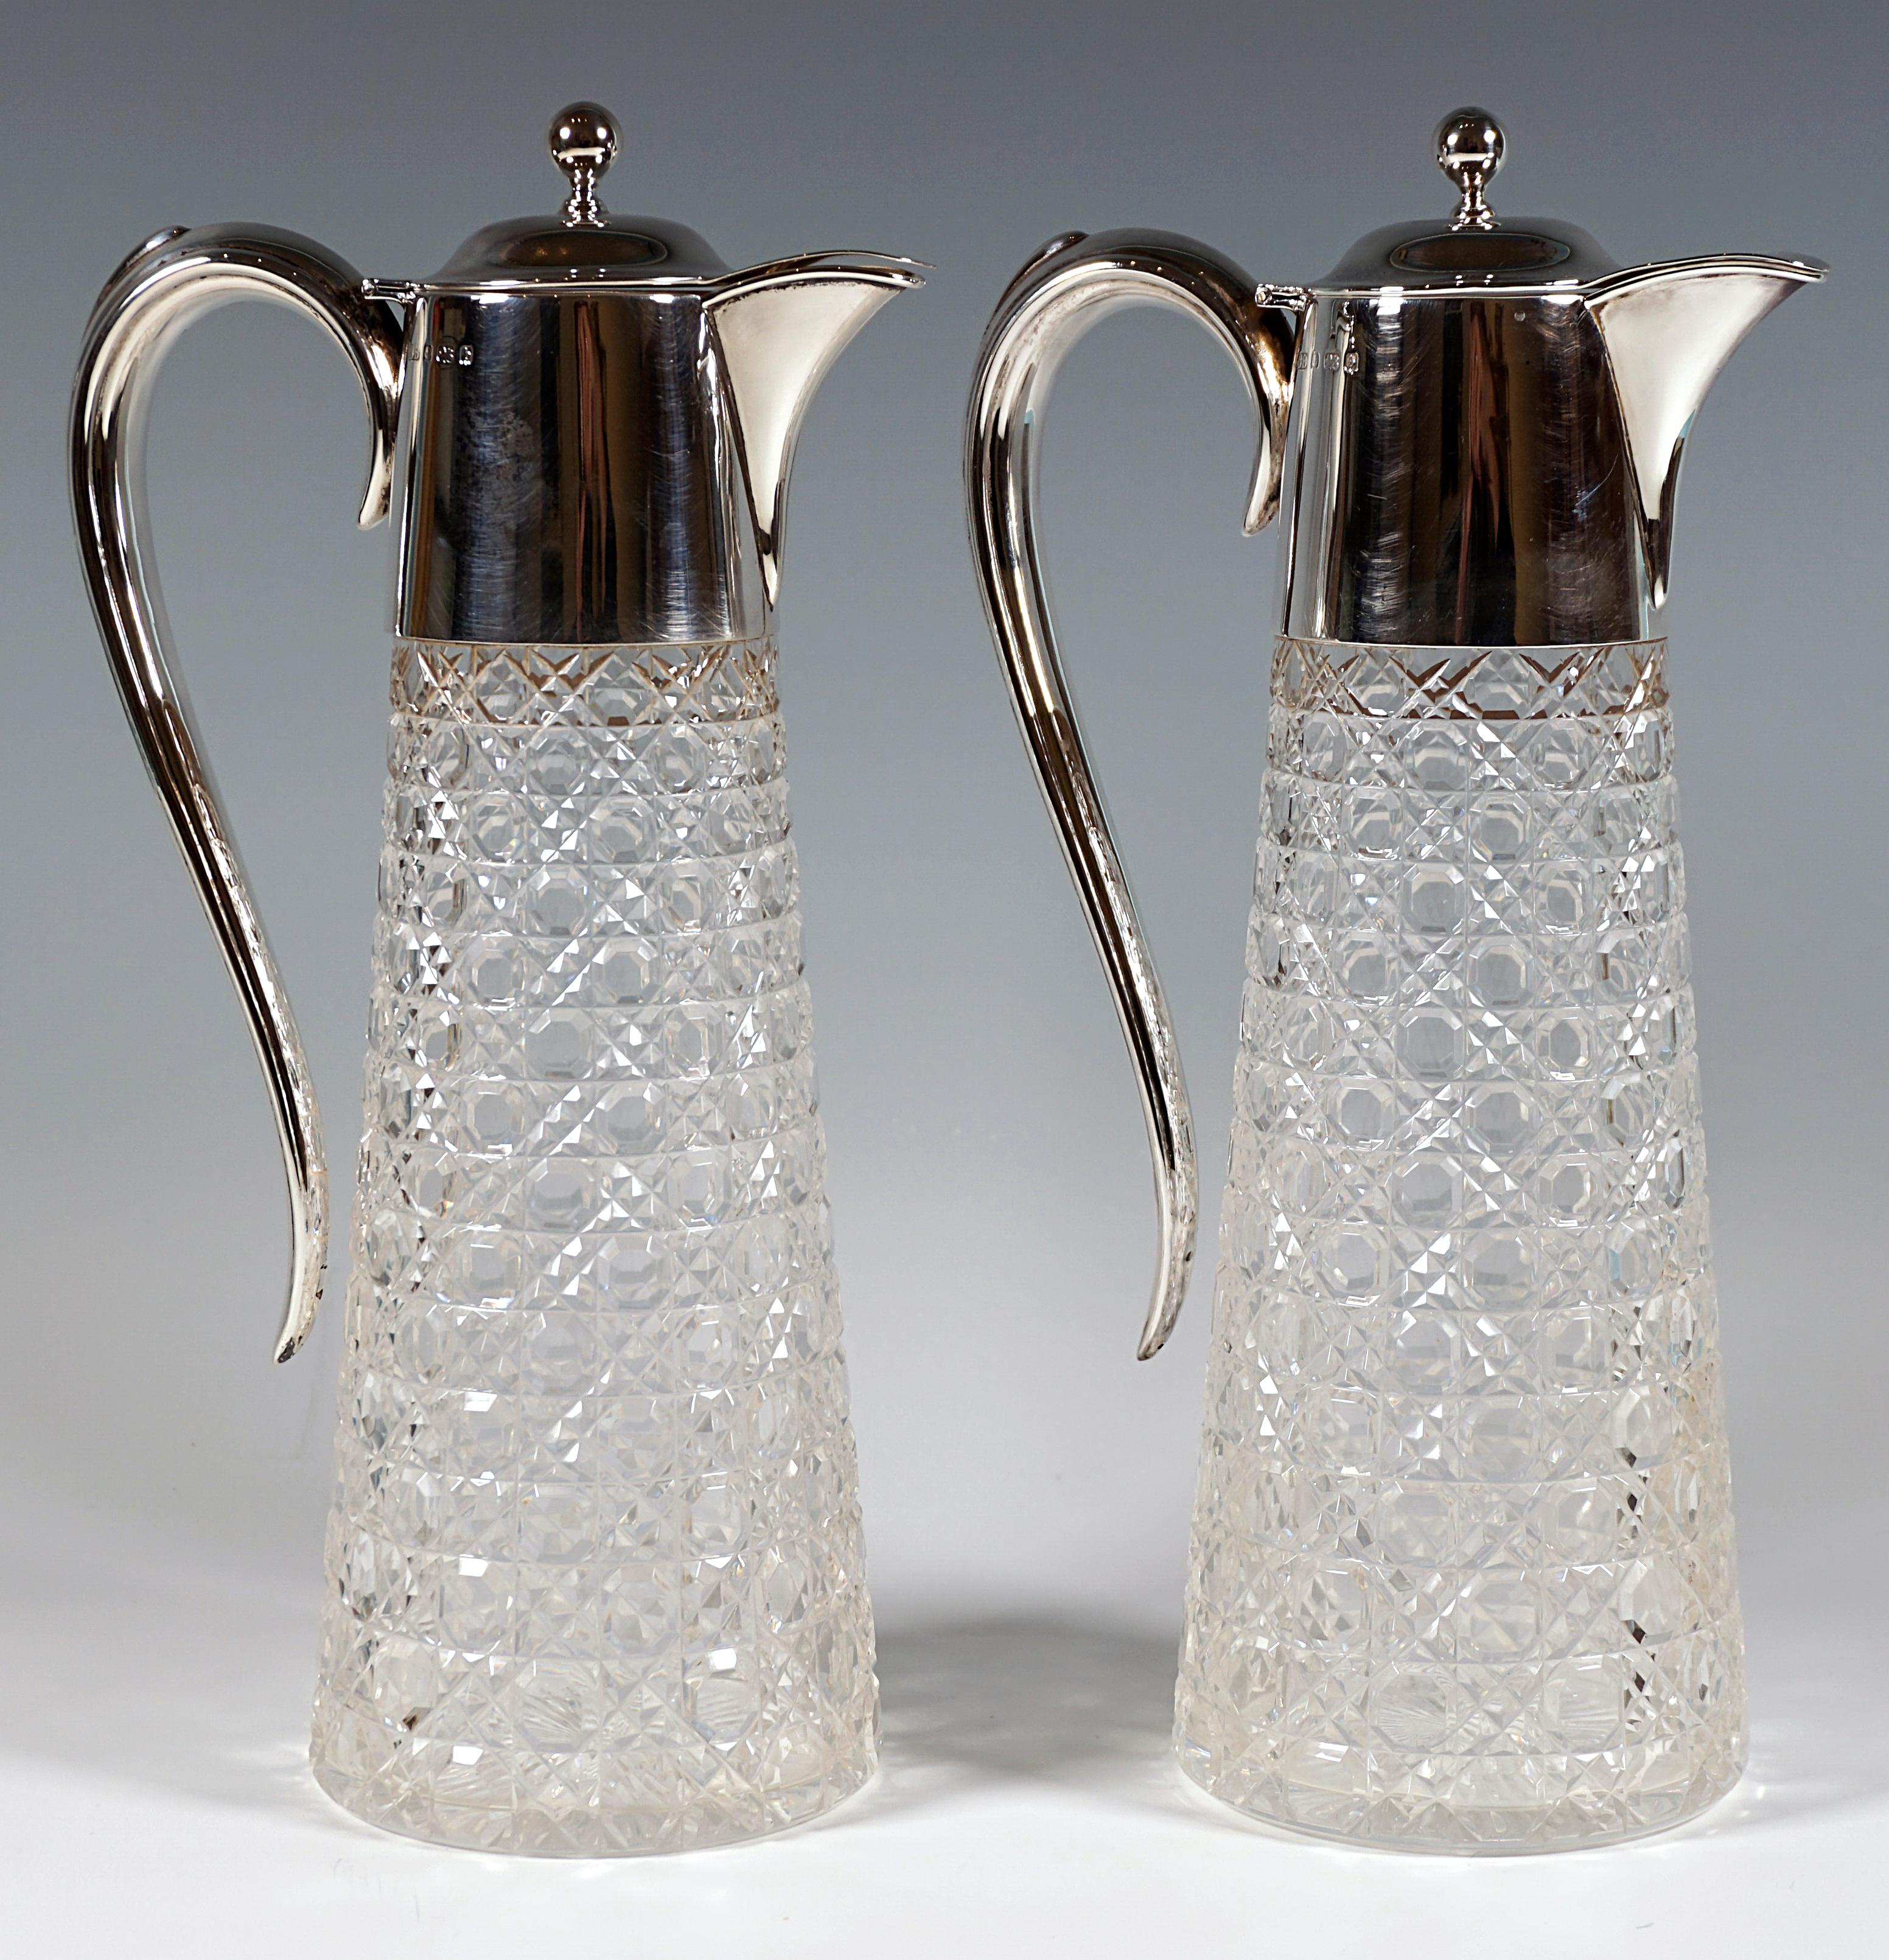 Two Edward VII clear glass carafes with a conical body, elaborate steinel and octagonal cut on the outer wall, finely radiated base star, smooth silver mount with beak spout and elegantly curved handle, hinged slightly domed lid with curved spout